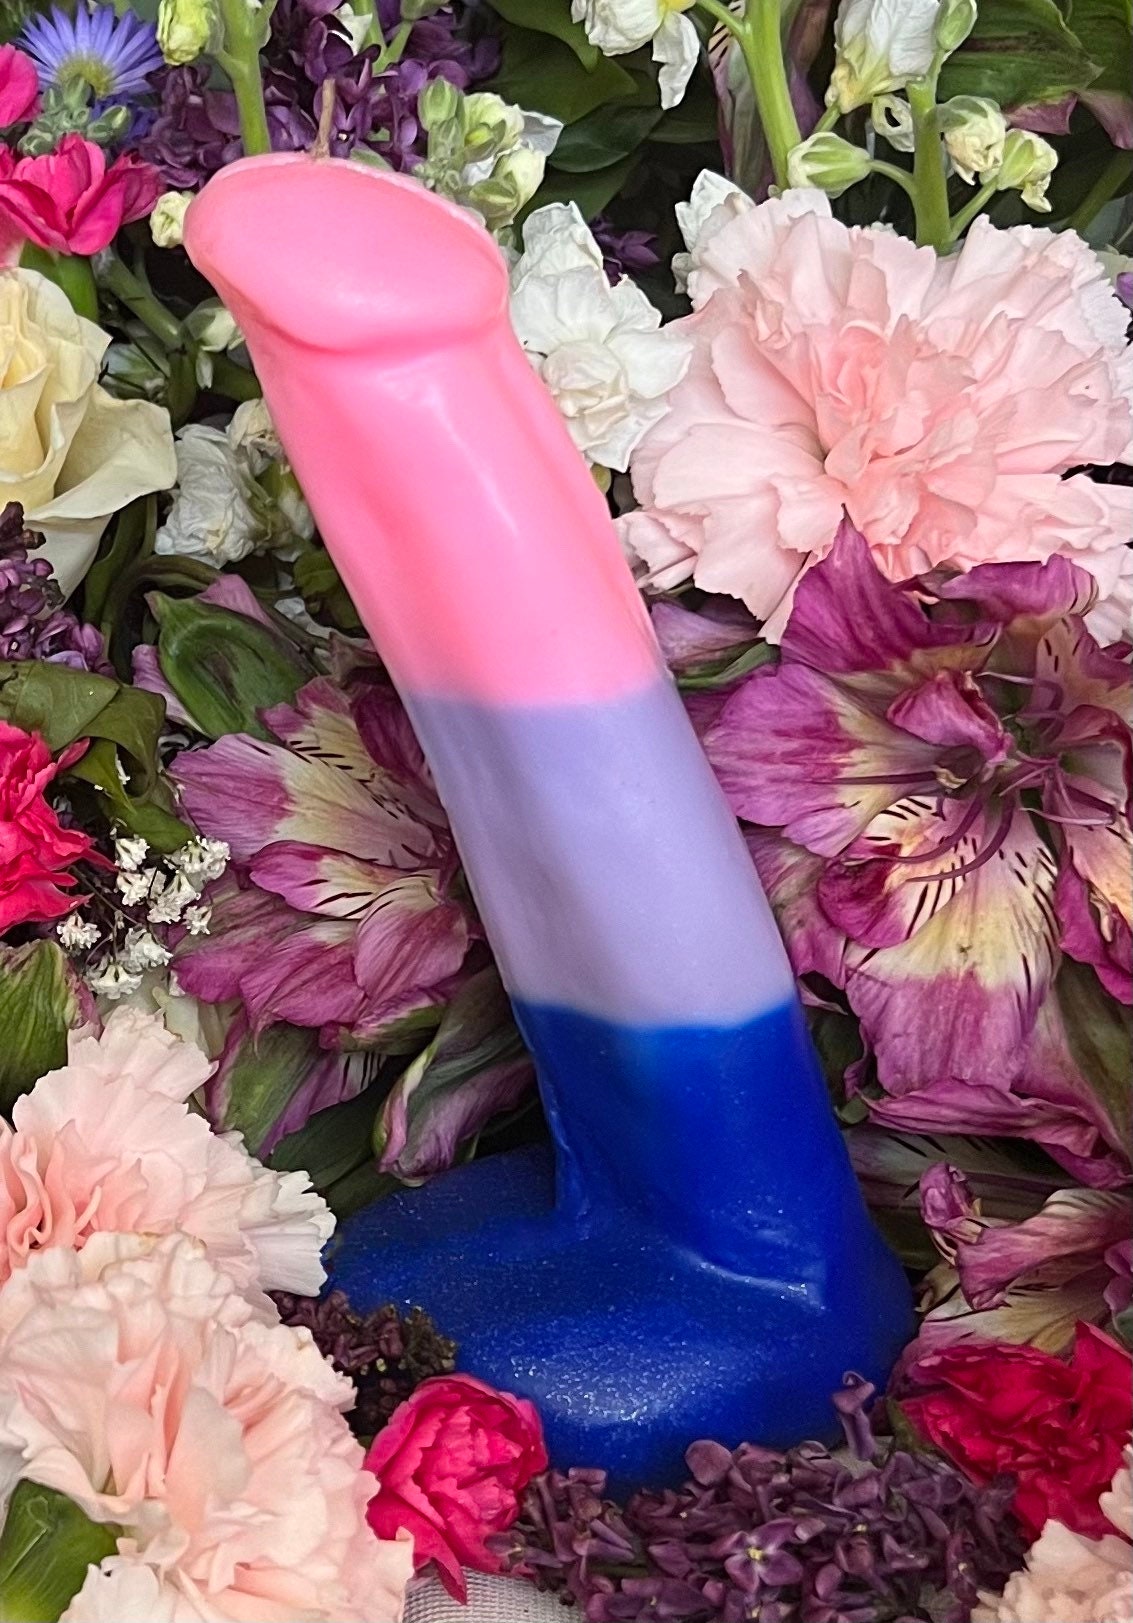 Bisexual Pride Penis Candle + Passion + Sex + Casual Encounters